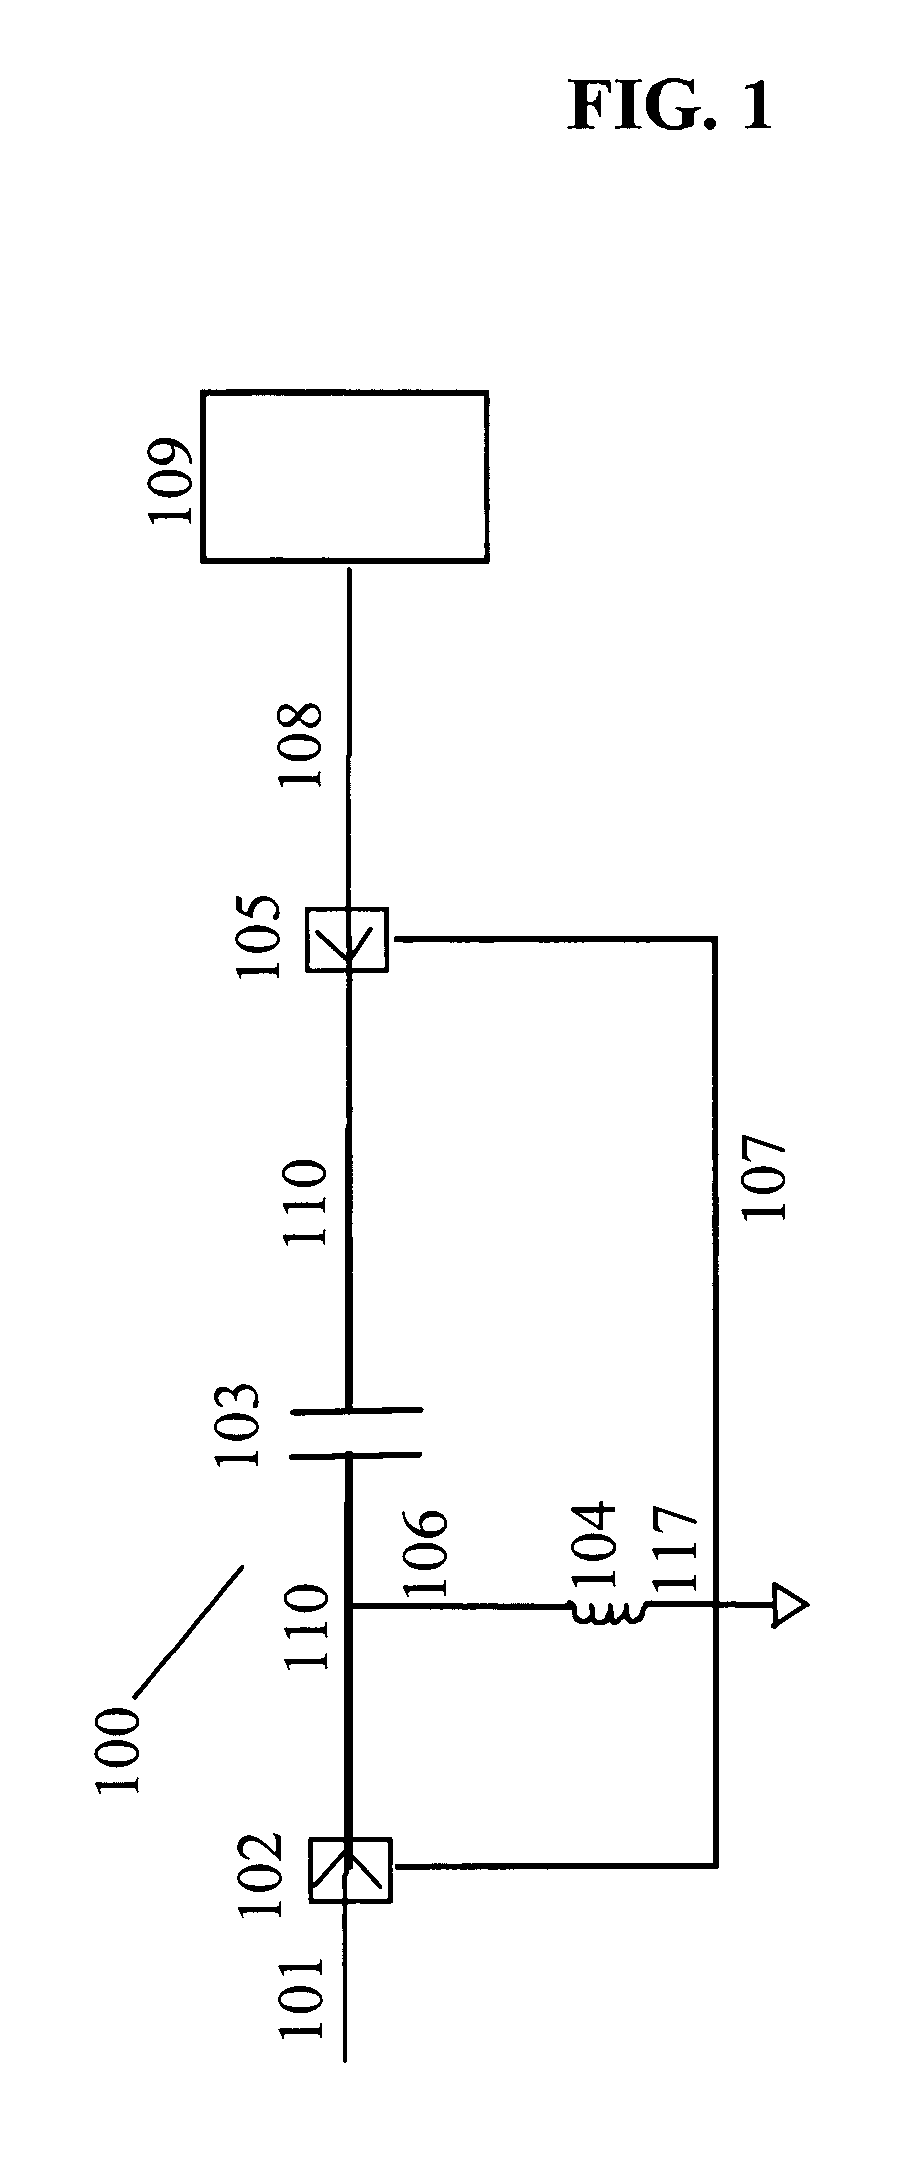 Surge suppressor with increased surge current capability